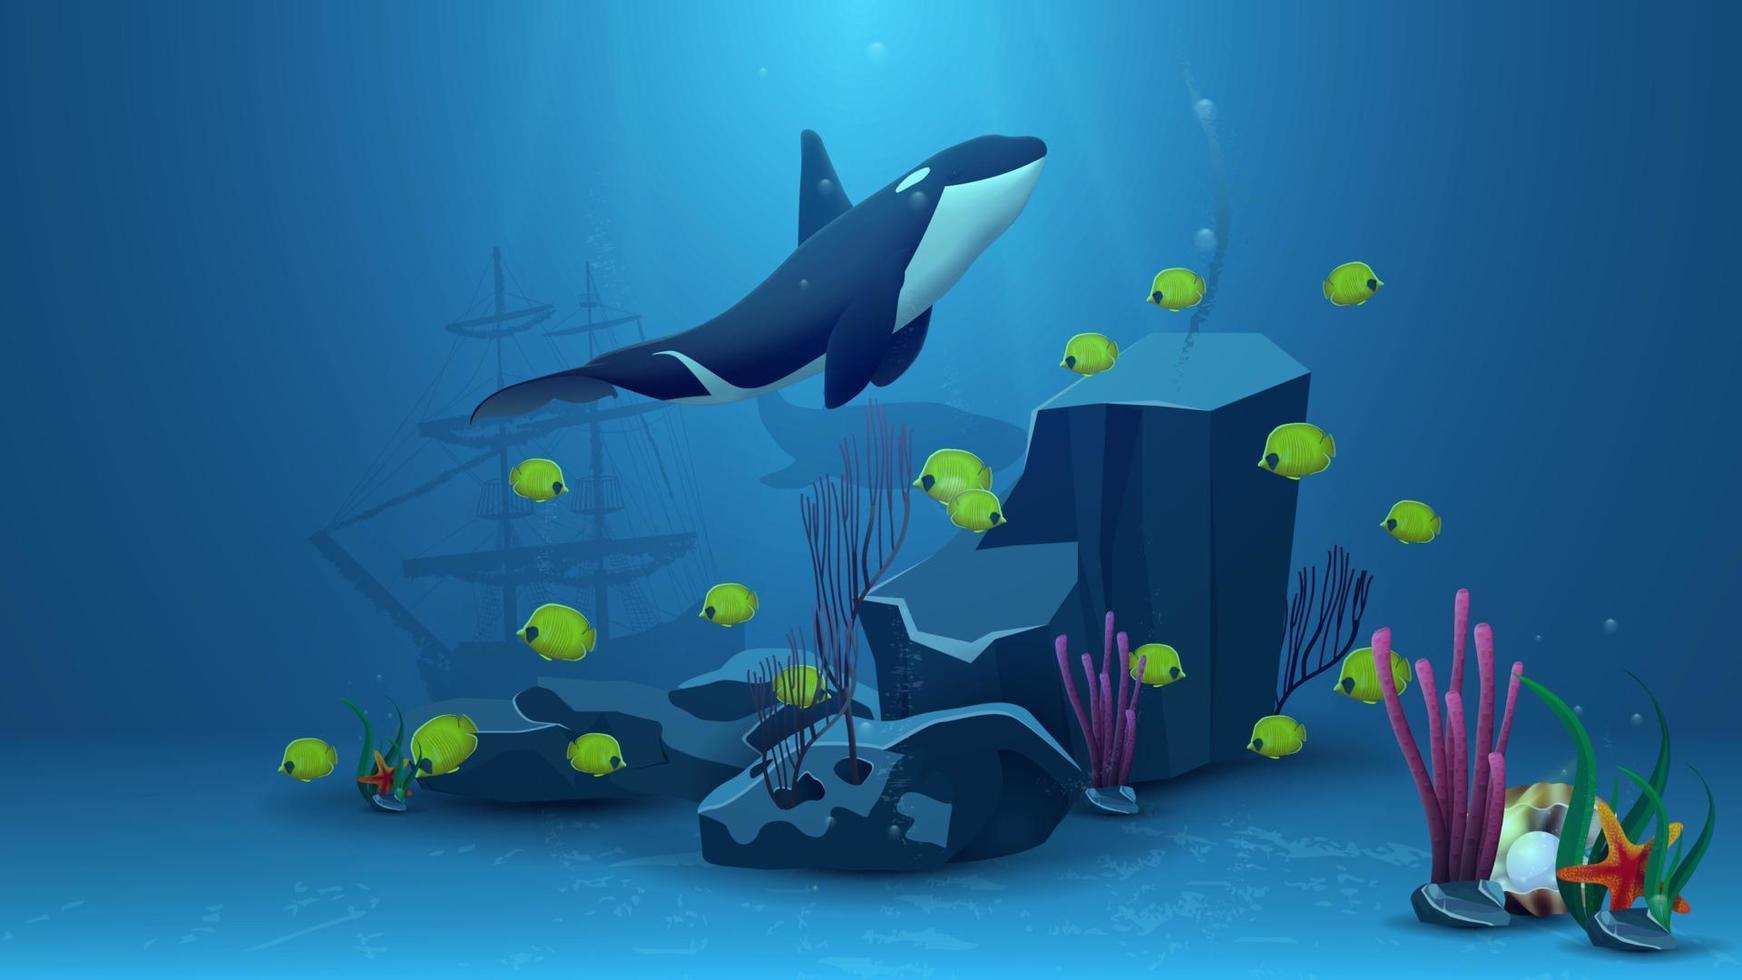 Underwater world, vector illustration with yellow fish, rock, starfish, pearl and killer whale